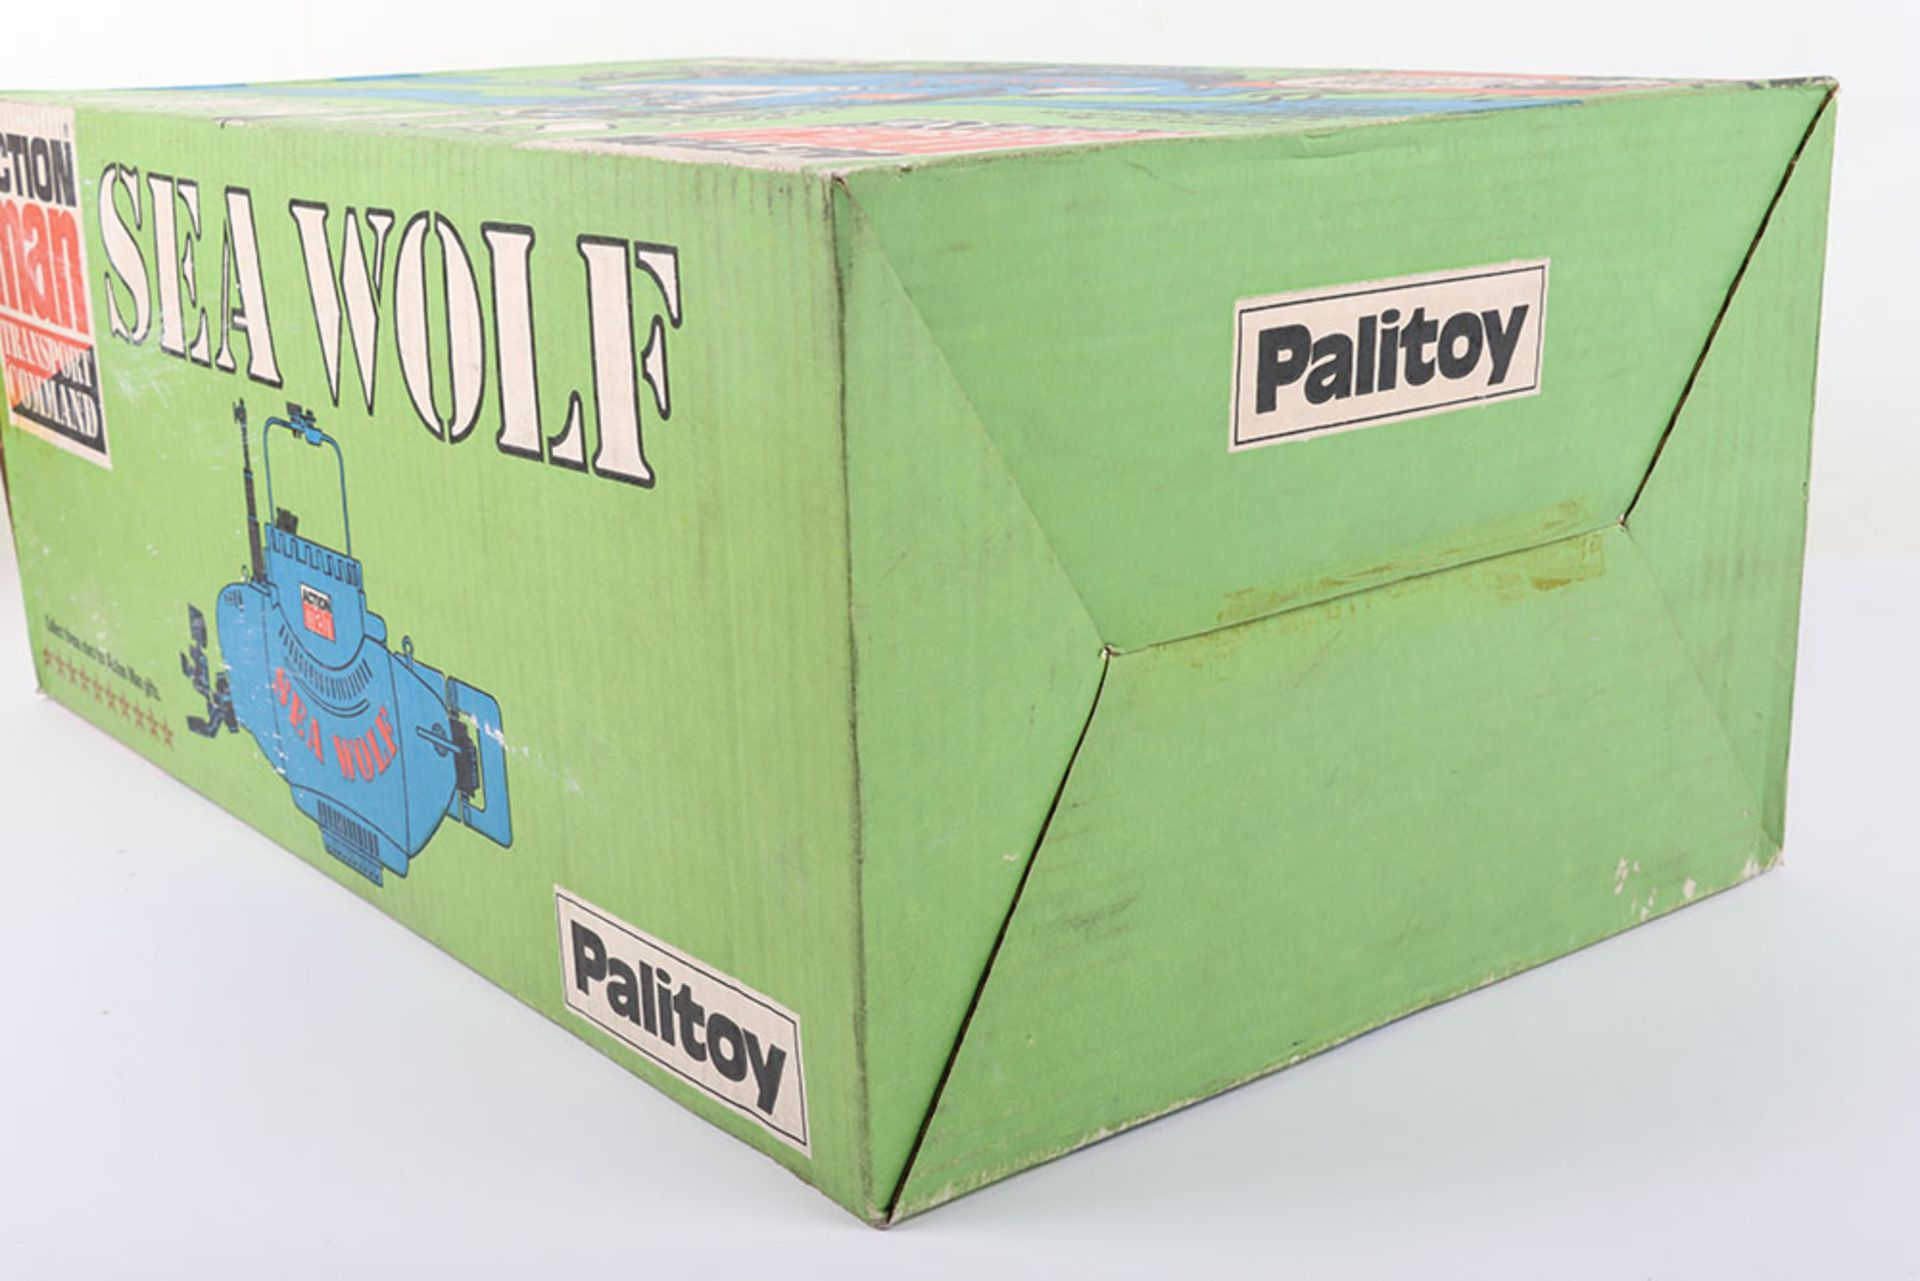 Palitoy Action Man Sea Wolf - Image 7 of 7